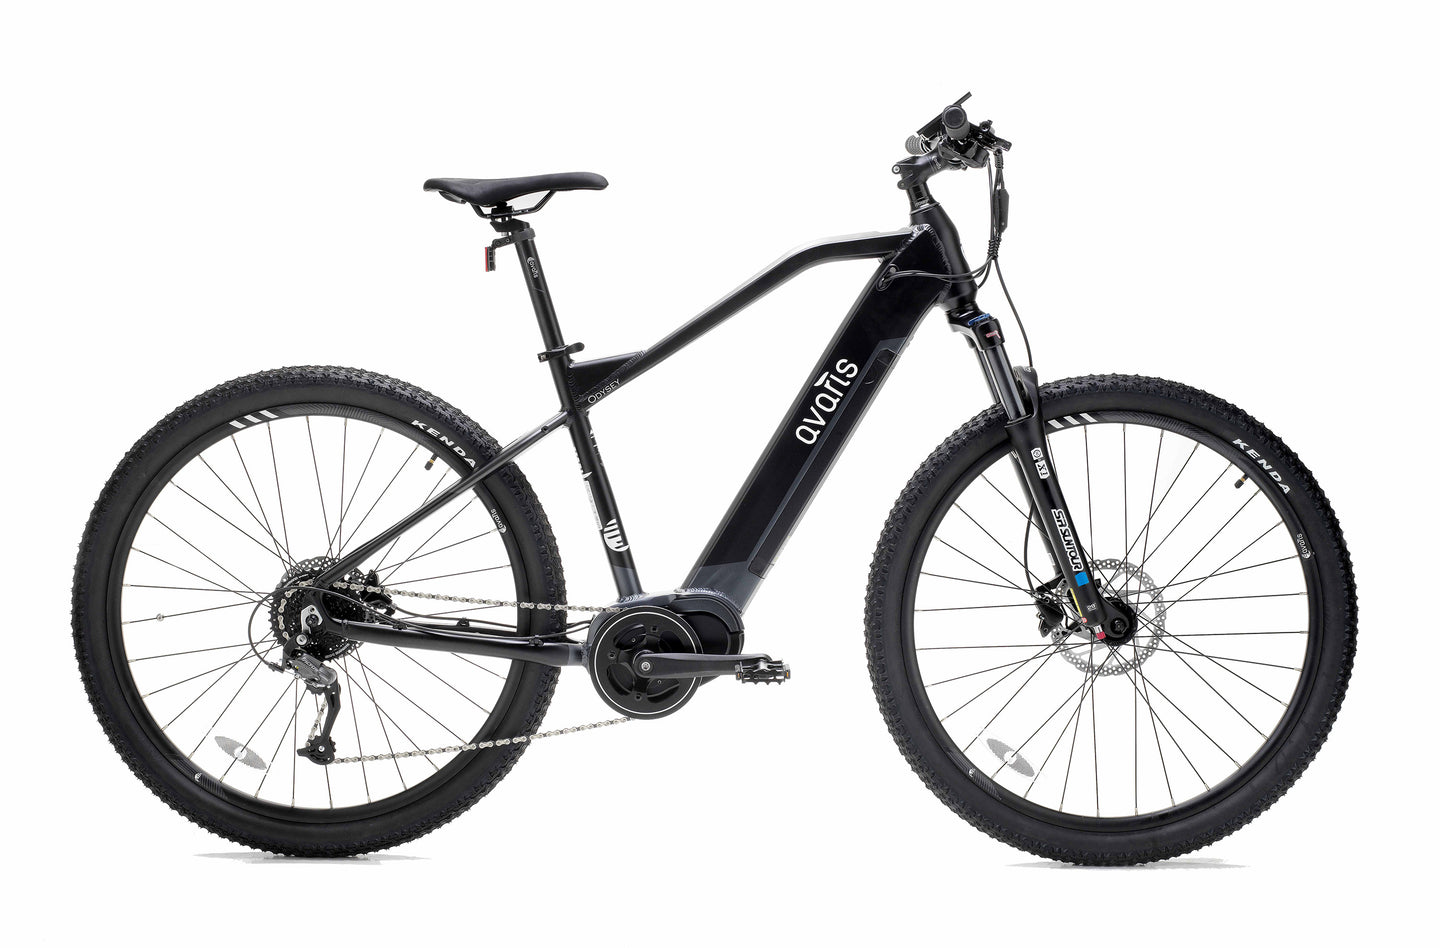 Avaris Odyssey 29er 720Wh hardtail mountain bike (Pre-Owned)